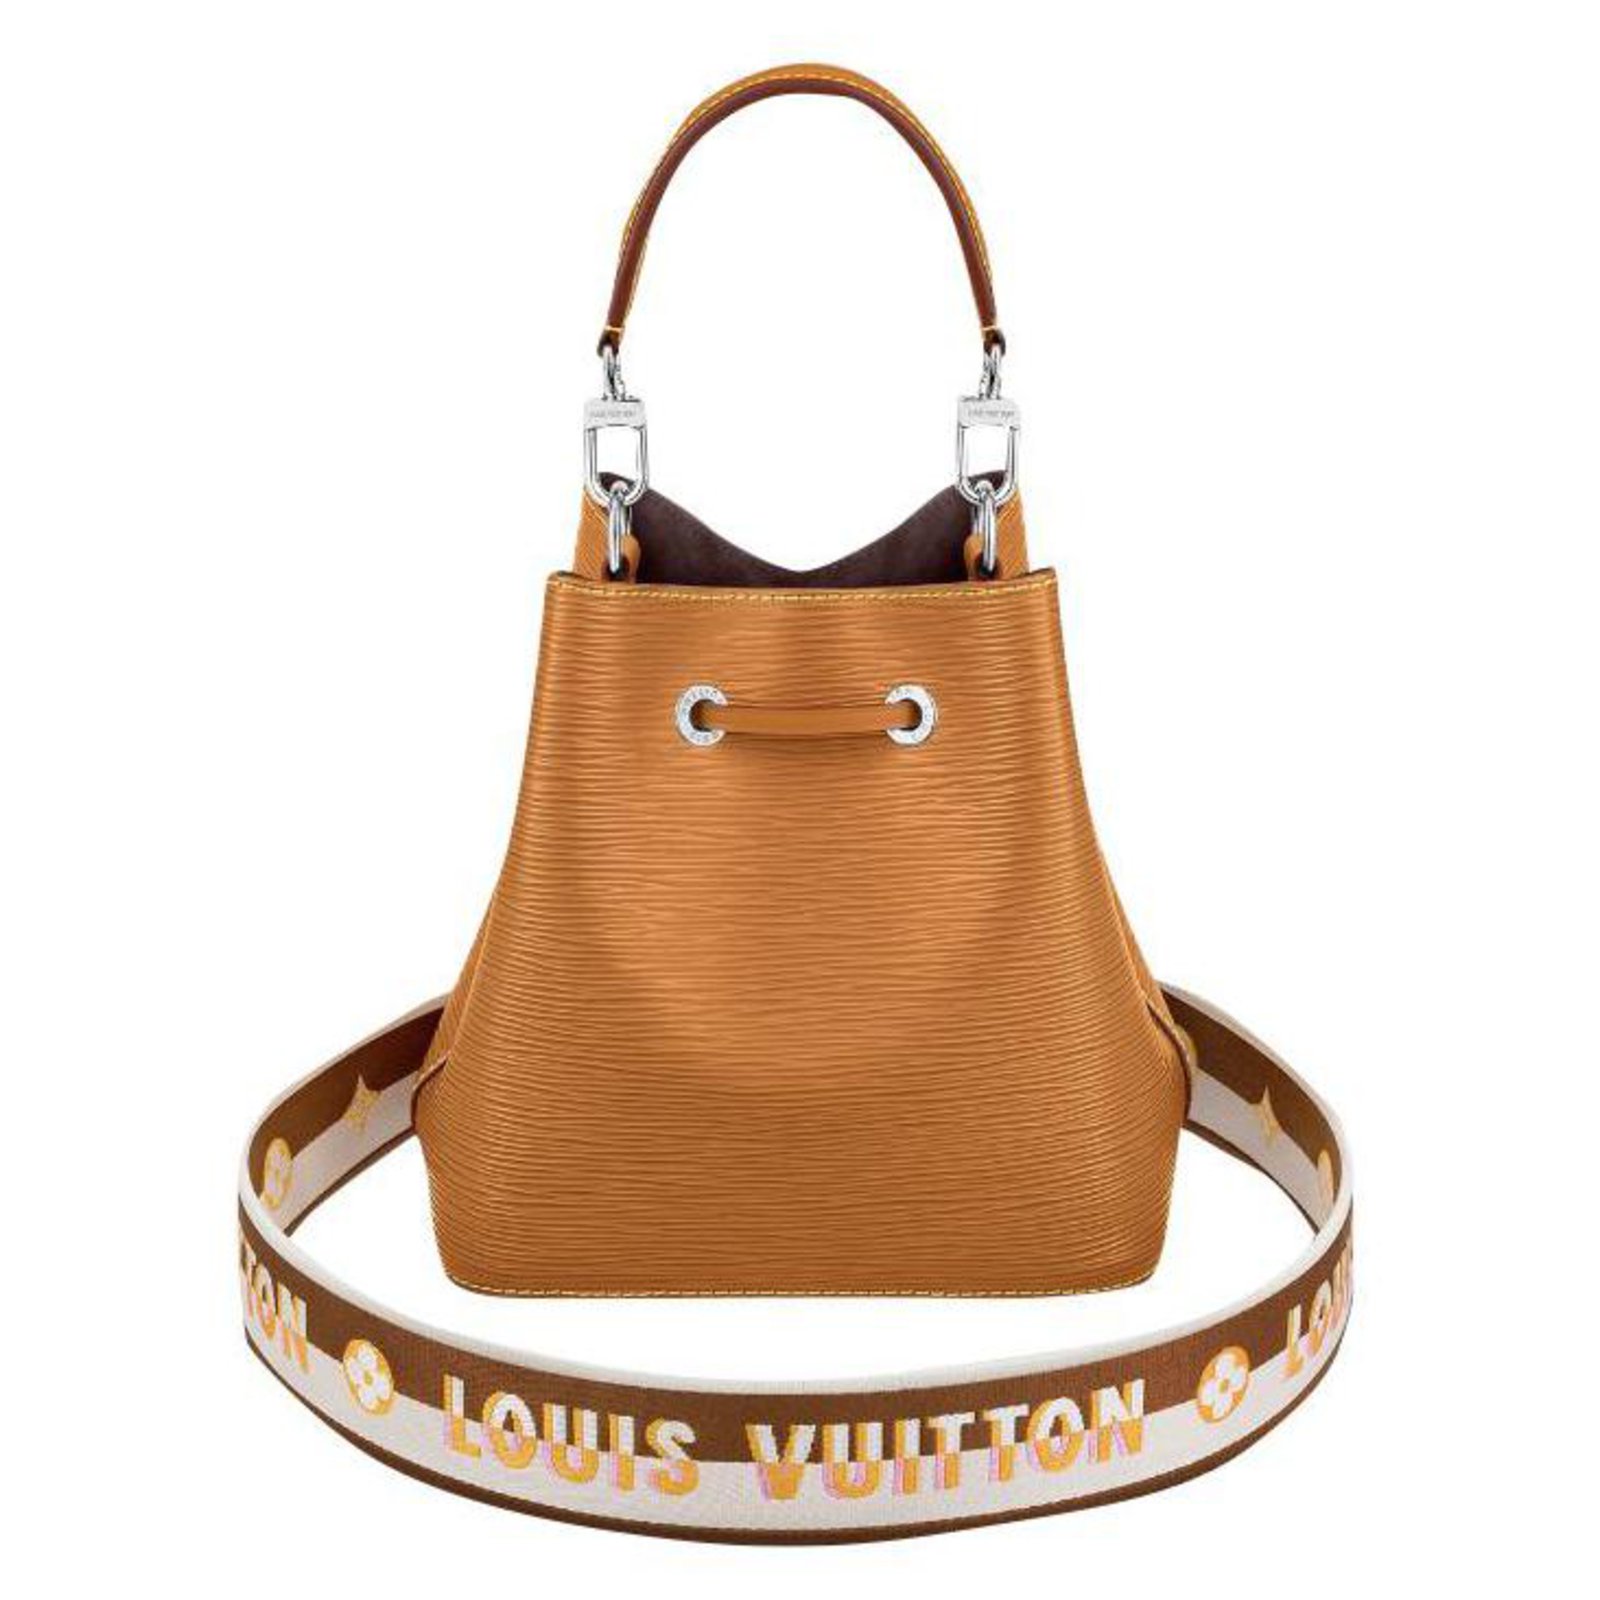 Louis Vuitton Neo Noe Epi Leather in Brown